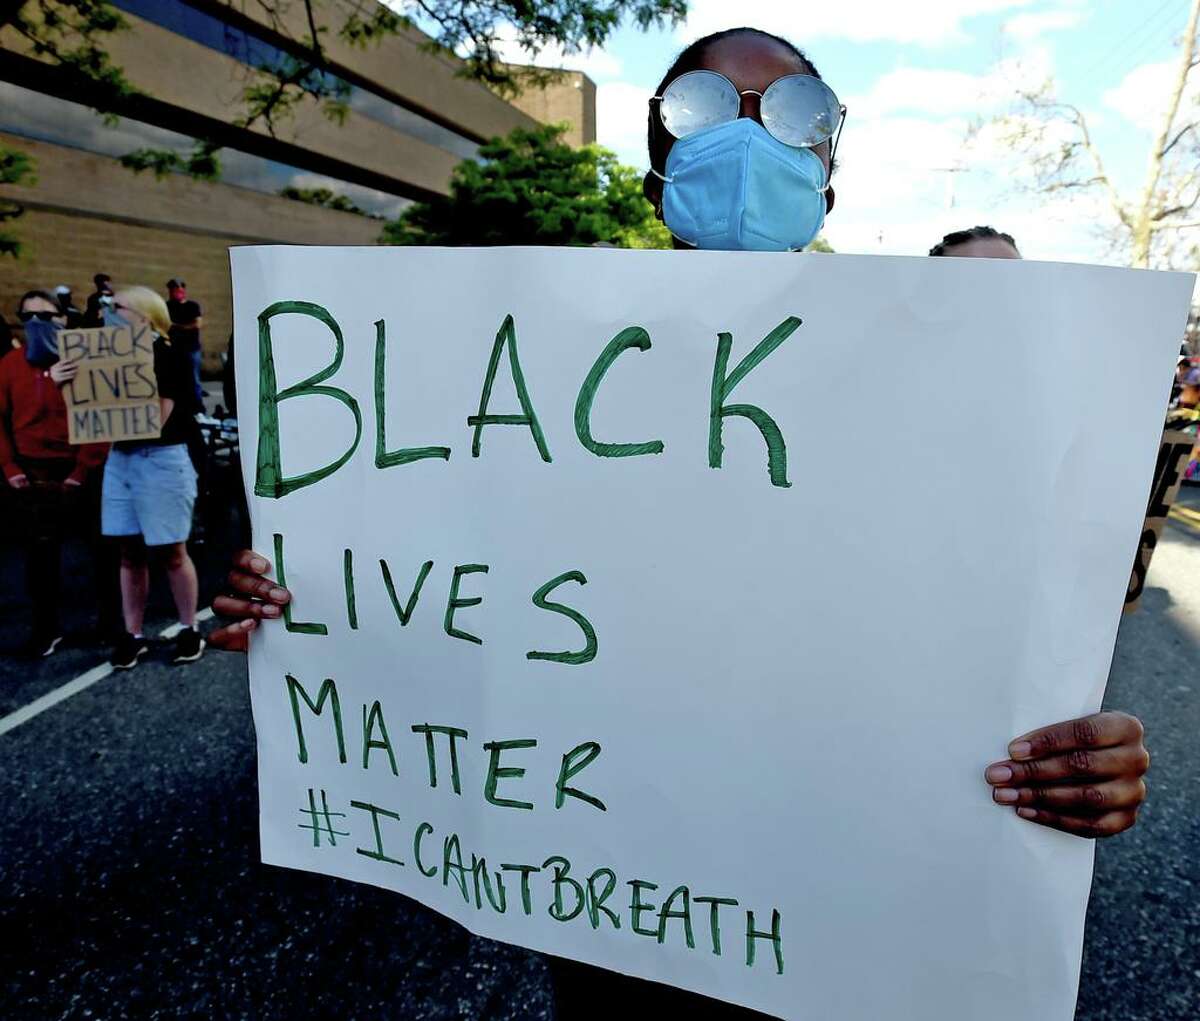 New Haven, Connecticut - Sunday, May 31, 2020: Approximately 1,000 Black Lives Matter protesters and supporters protesting police brutality and the death of George Floyd in Minneapolis S'unday, marched in New Haven Sunday from Broadway to the Green, past Church and blocking the I-95 Highway in New Haven in both directions and then on to New Haven Police Headquarters protesting police brutality and the death of George Floyd in Minneapolis. As of 5:30 P.M. their were no police confrontations.